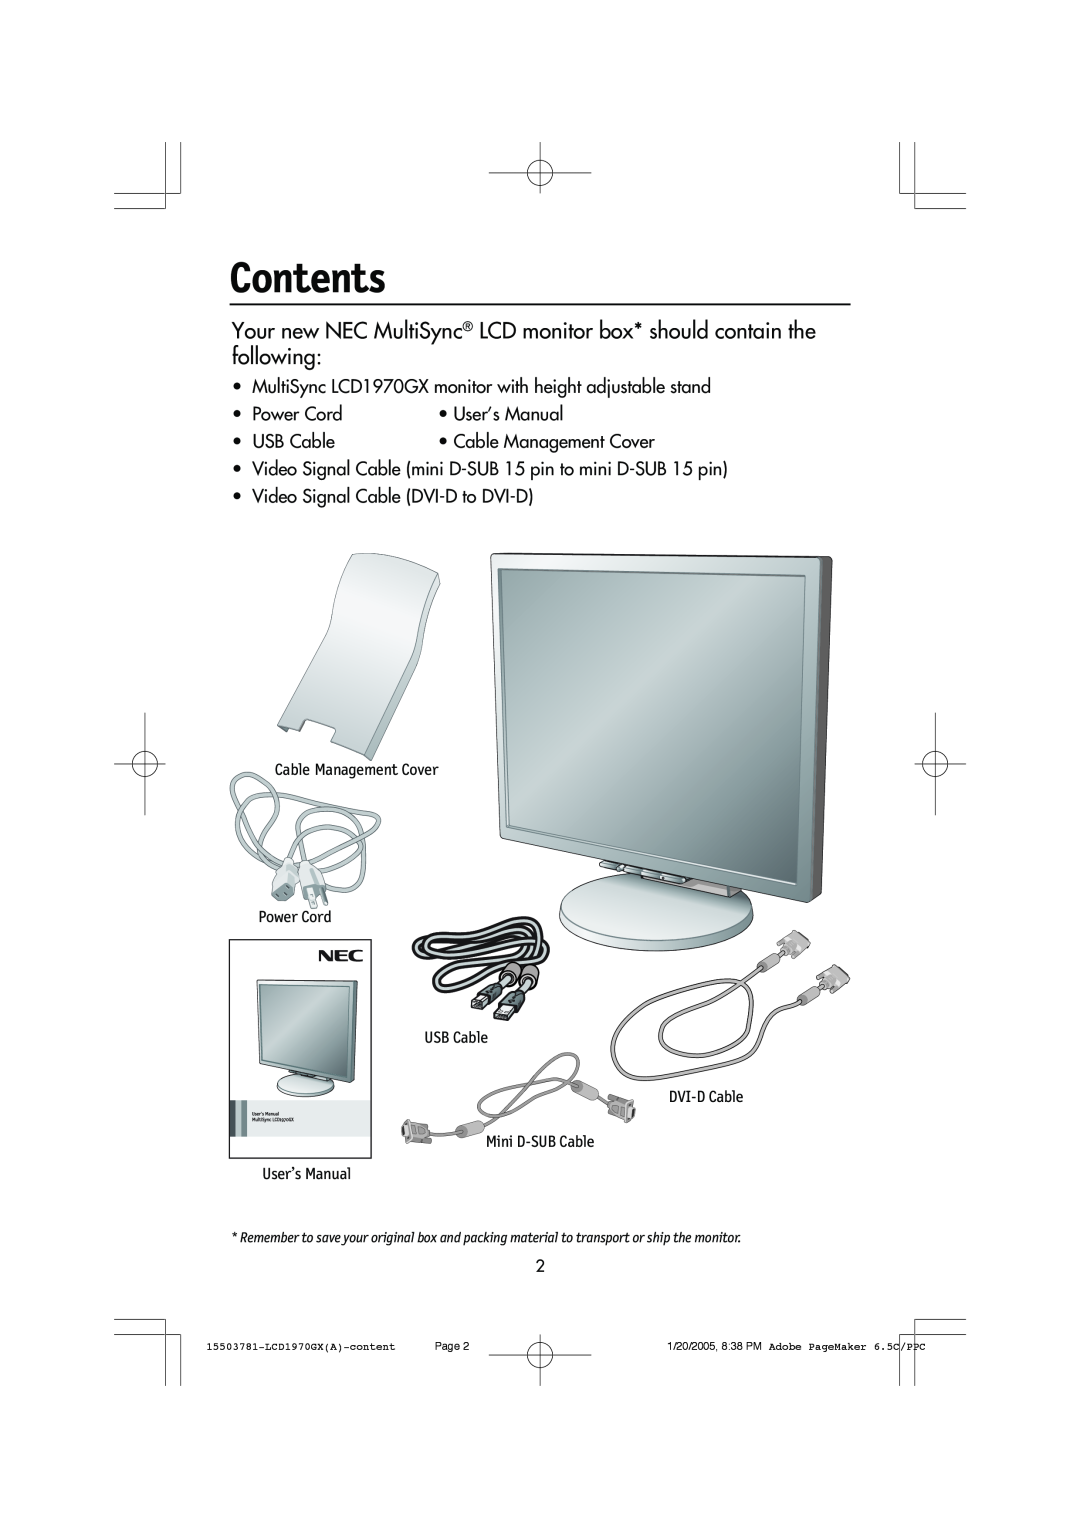 NEC user manual Contents, Cable Management Cover Power Cord USB Cable, 15503781-LCD1970GXA-content, Page 